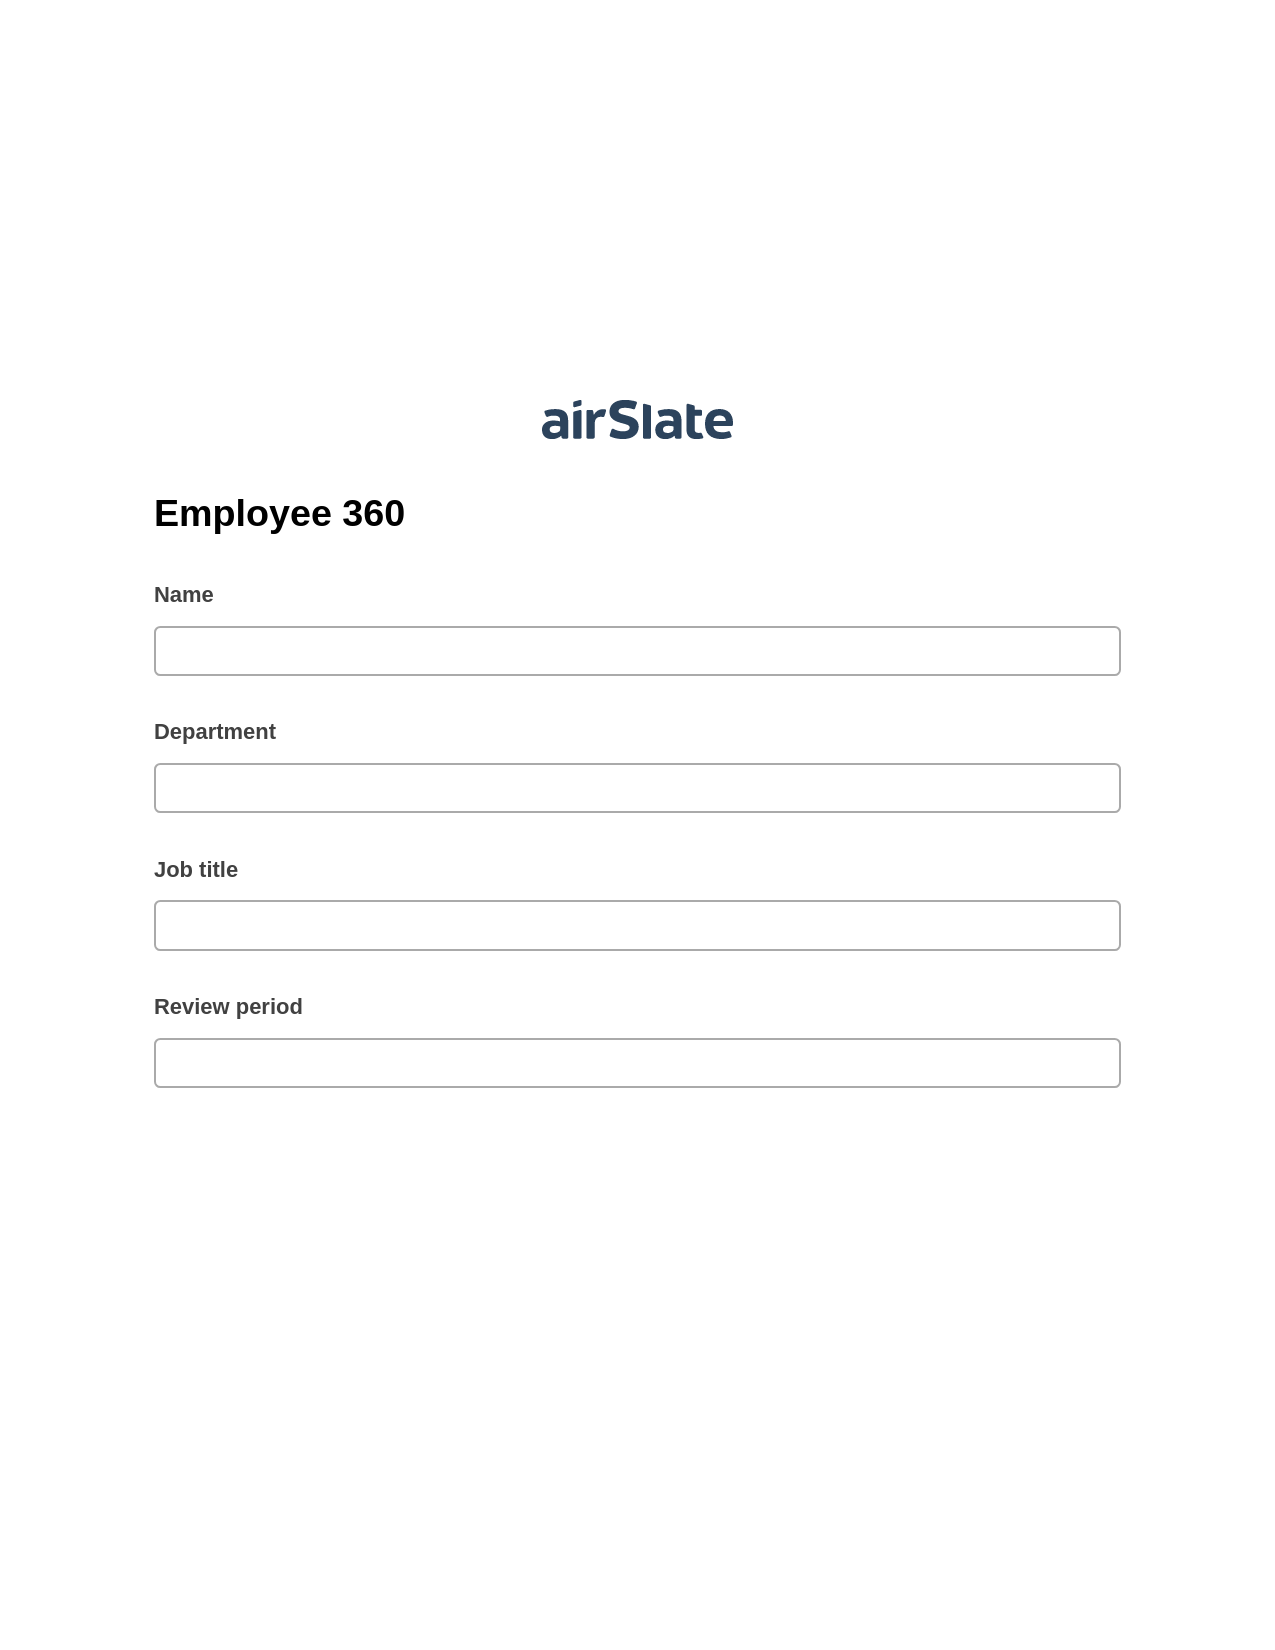 Employee 360 Pre-fill from CSV File Bot, Email Notification Bot, Export to NetSuite Bot